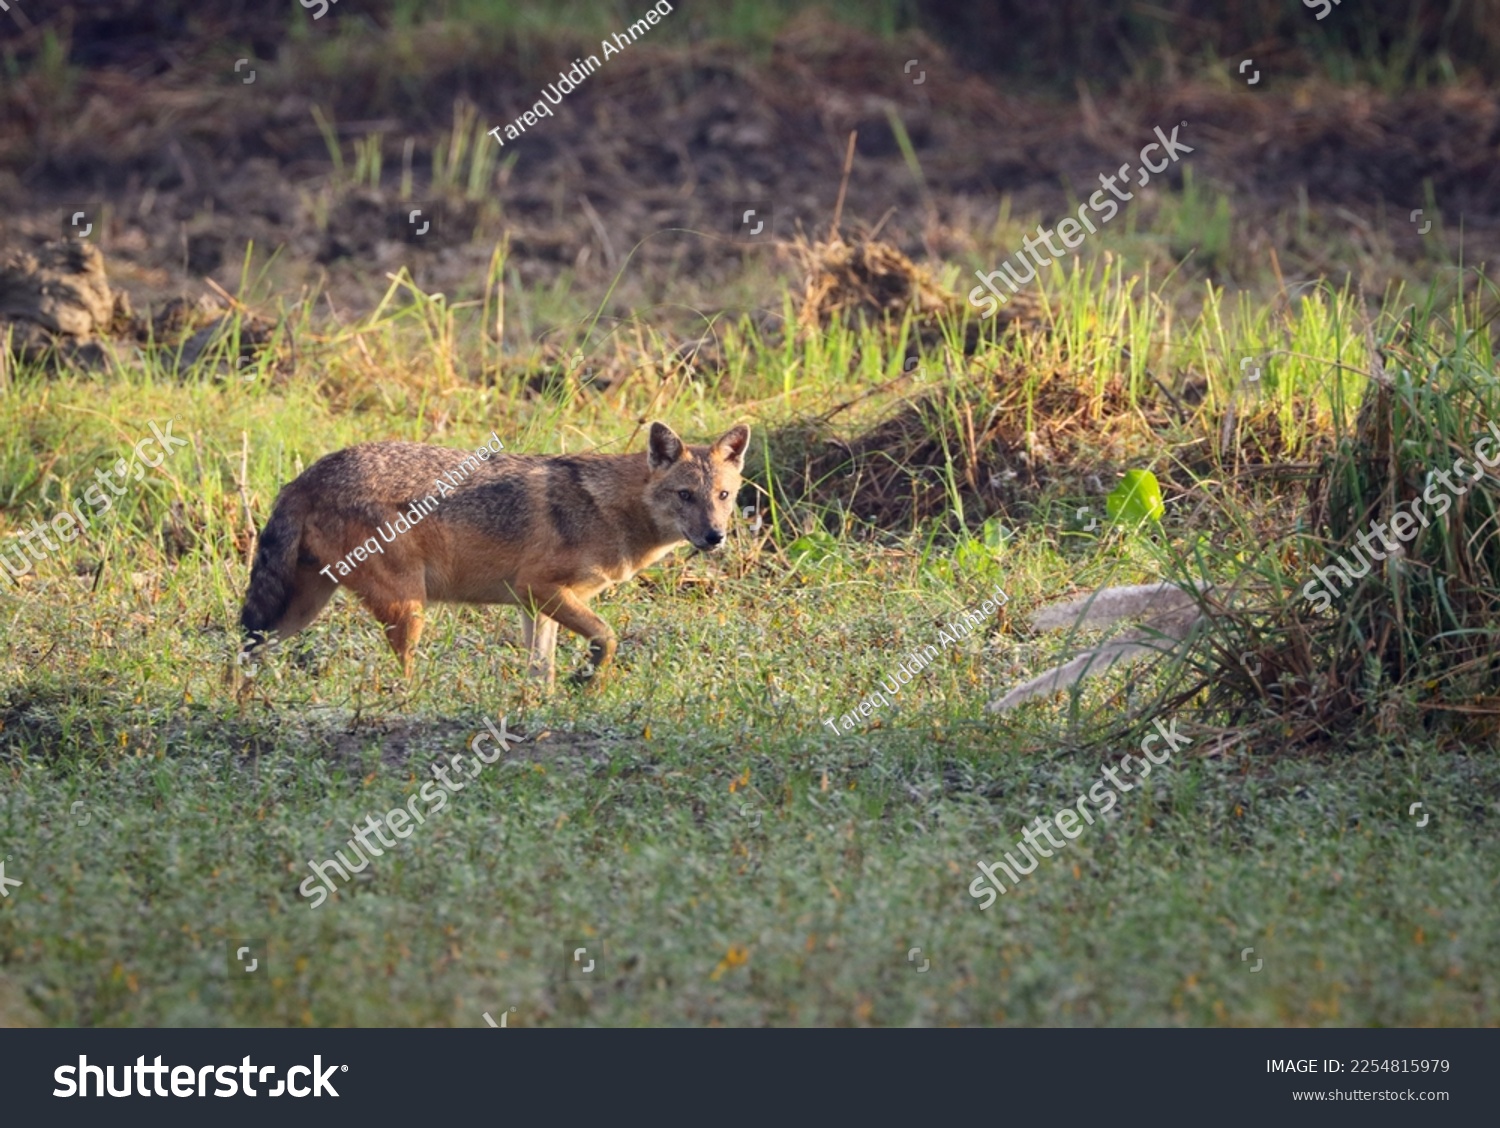 golden jackal, also called common jackal, is a wolf-like canid that is native to Southeast Europe, Central Asia, Western Asia, South Asia, and regions of Southeast Asia. #2254815979